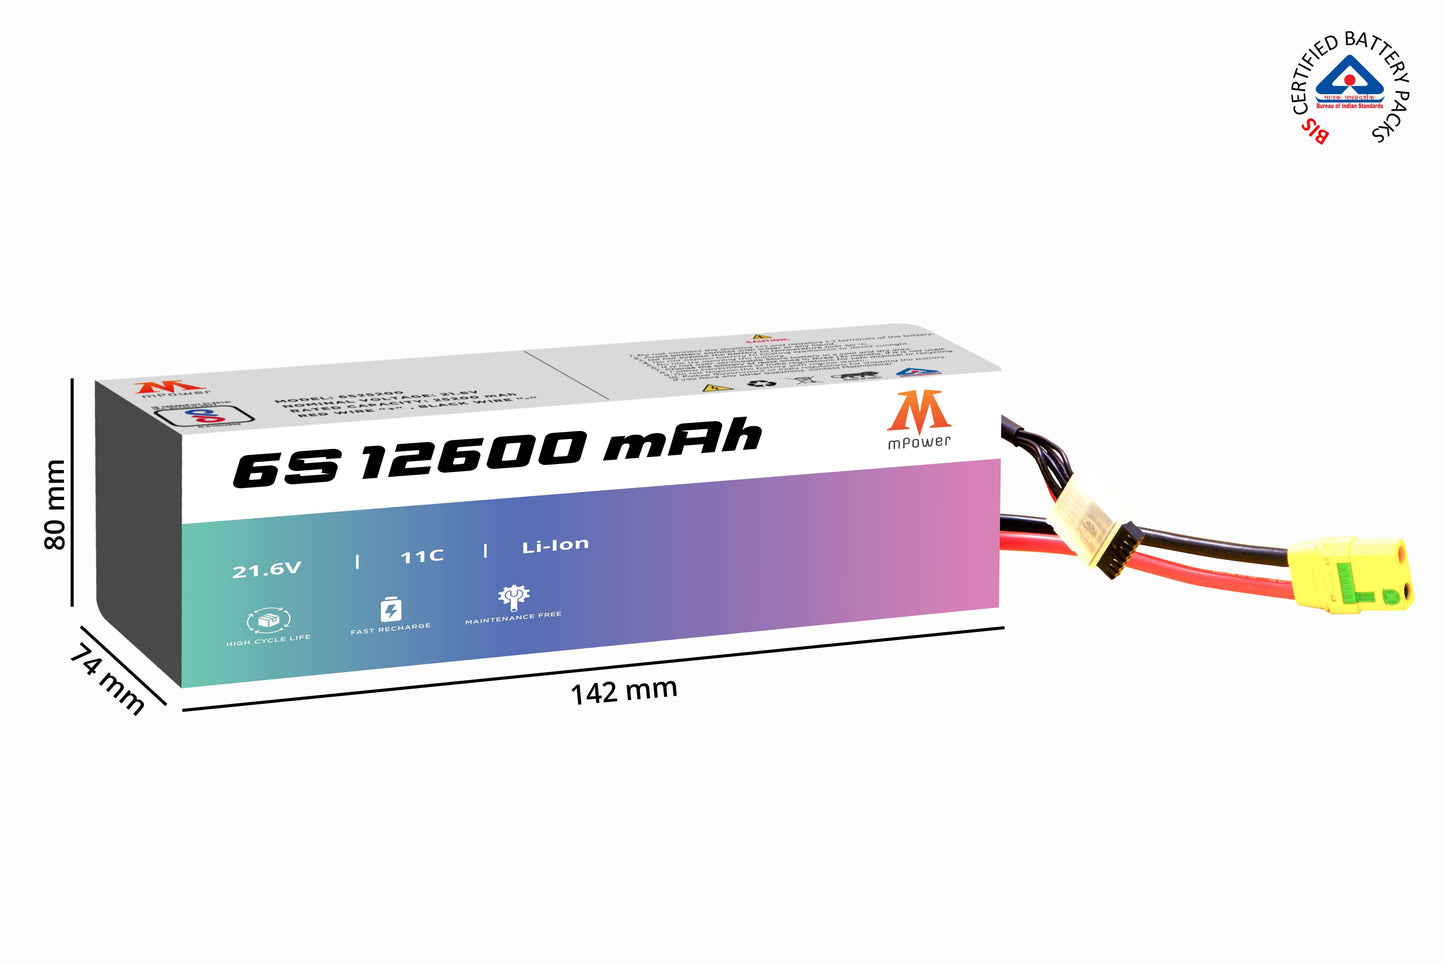 mPower 6S 12600mAh Lithium-ion Battery for Agricultural Spraying Drones